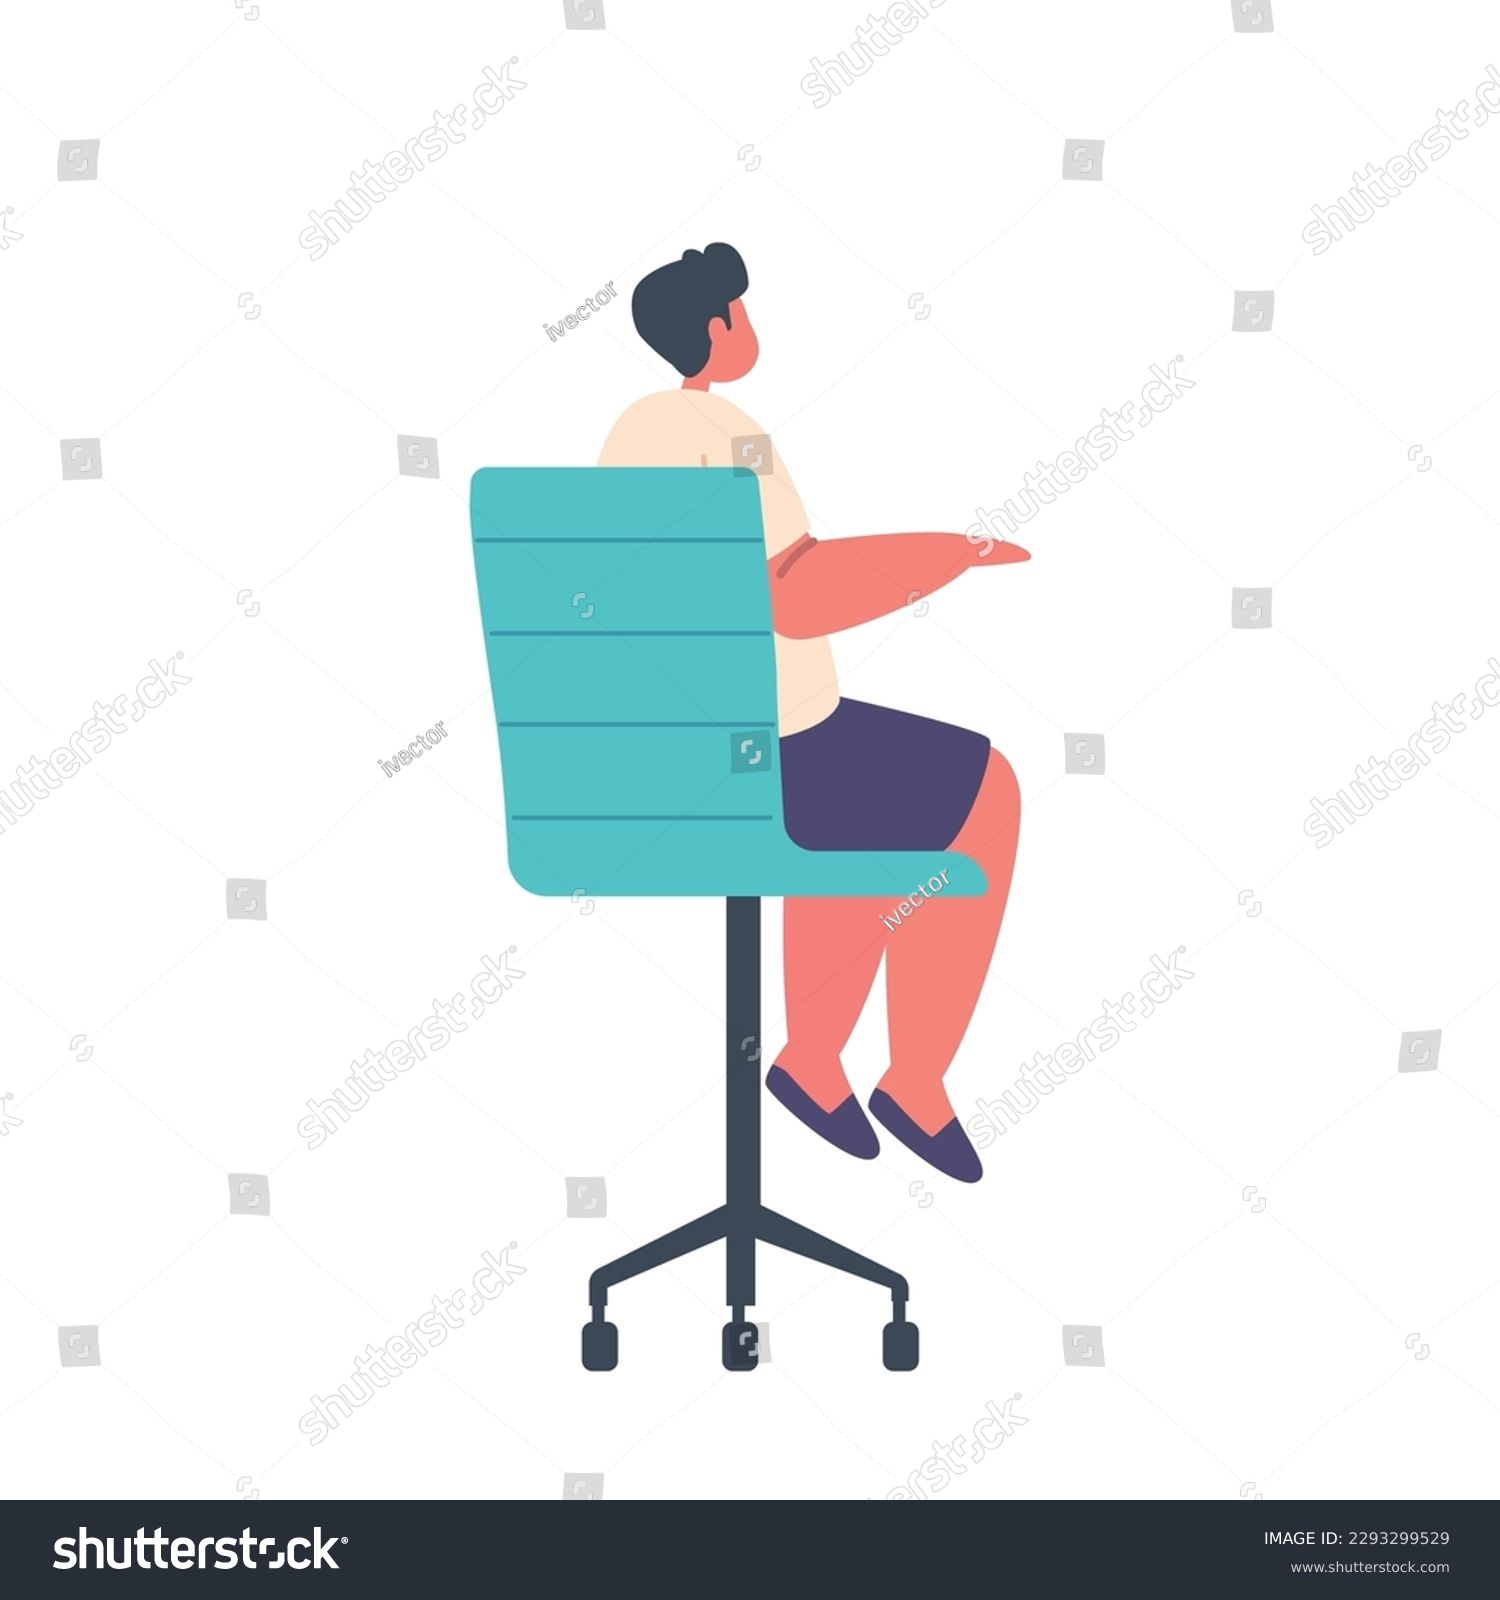 SVG of Little Boy Character Sitting On Chair Rear View With Hands Up And Feet Dangling Appears To Be Looking At Something svg